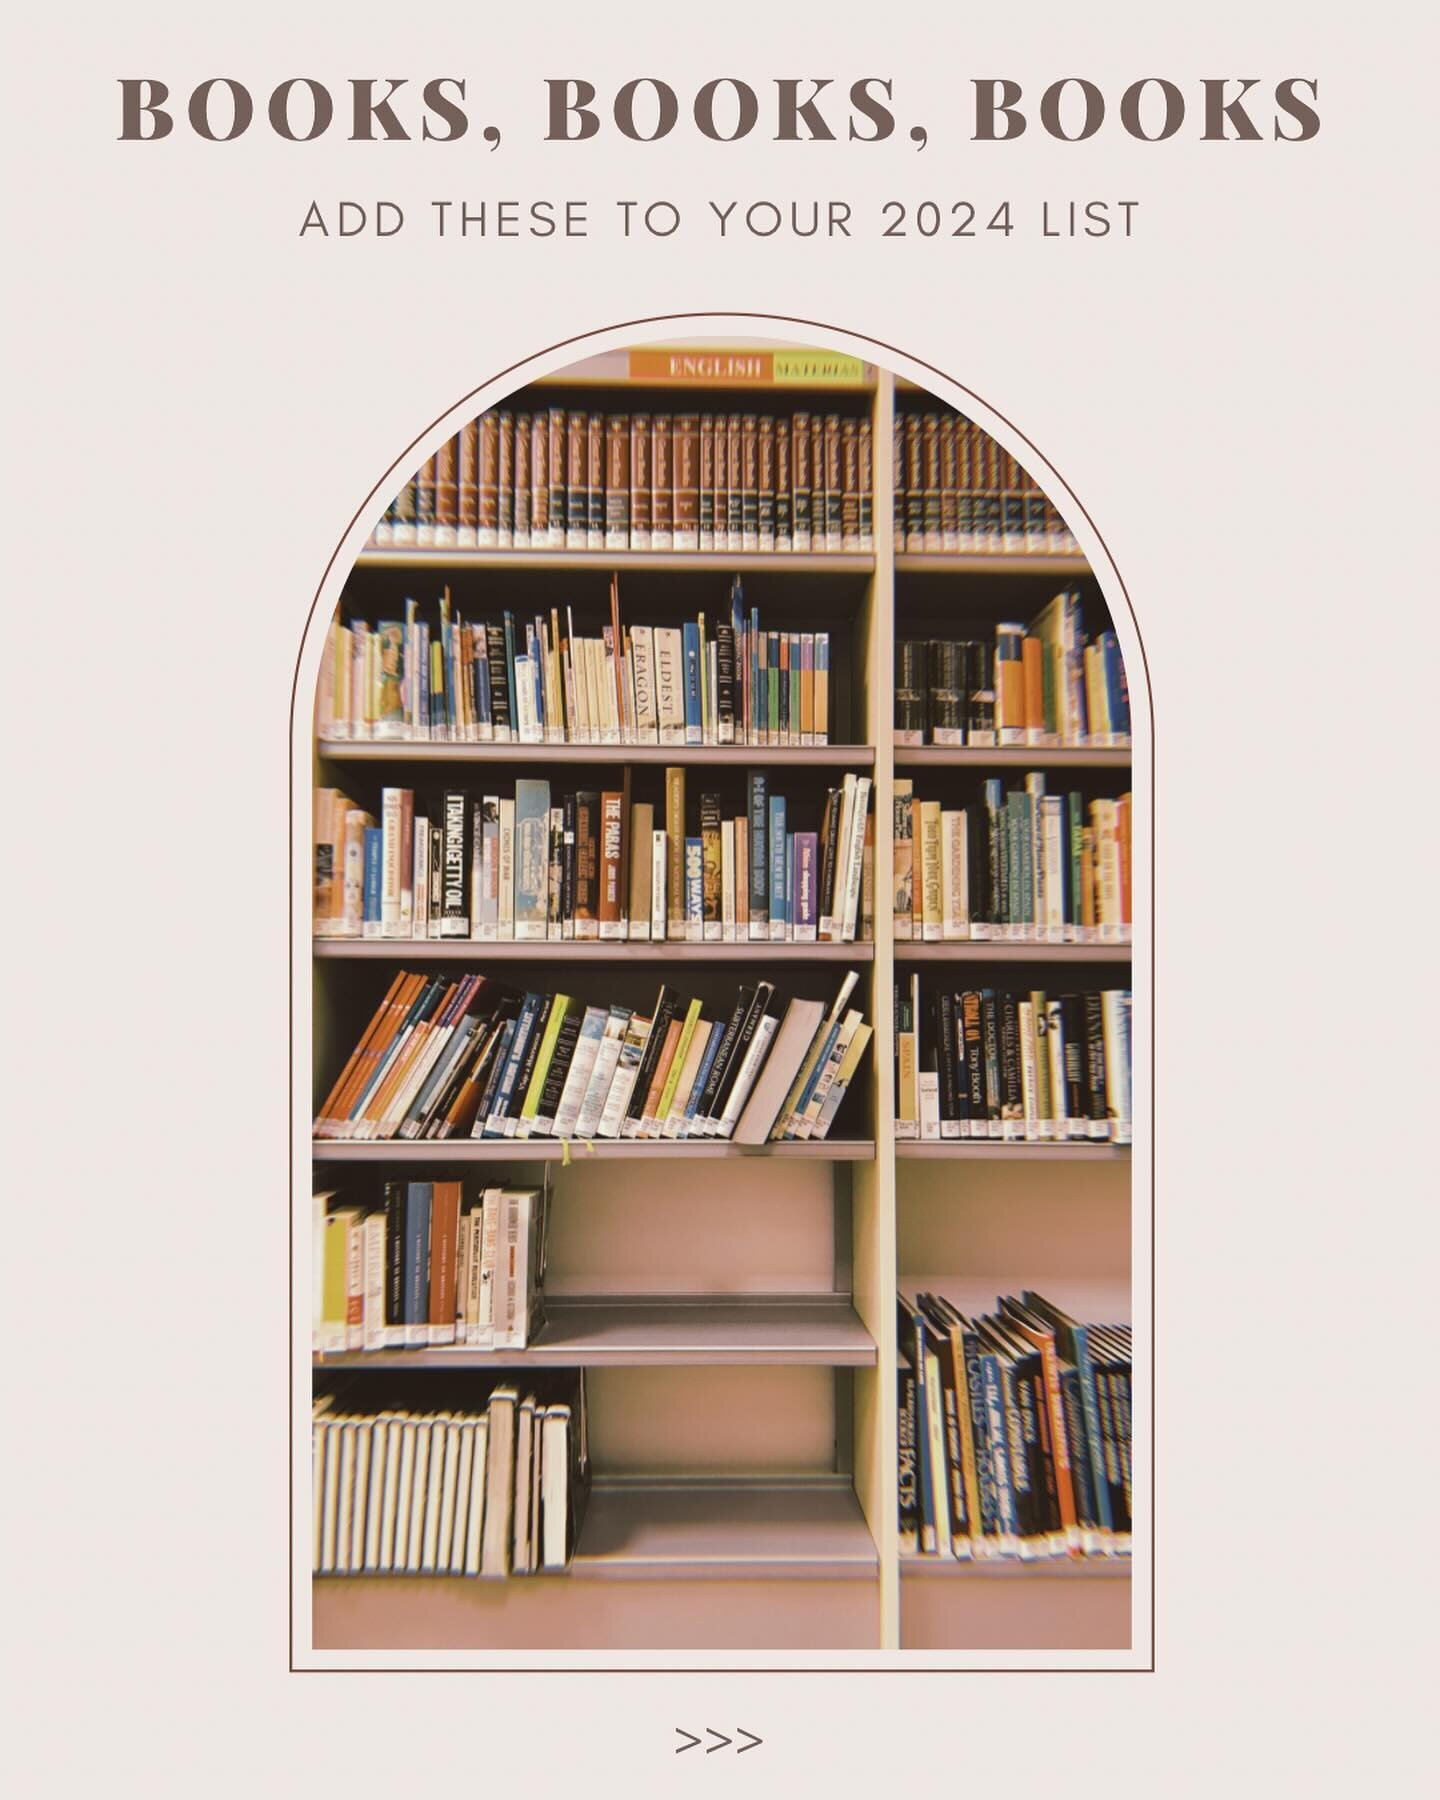 Do you have a goal to read more this year? 2023 was the first year I made a reading related goal and I felt so accomplished after finishing 13 books! Reading is great for us for so many reasons:

1- it&rsquo;s a great way to feel productive while als